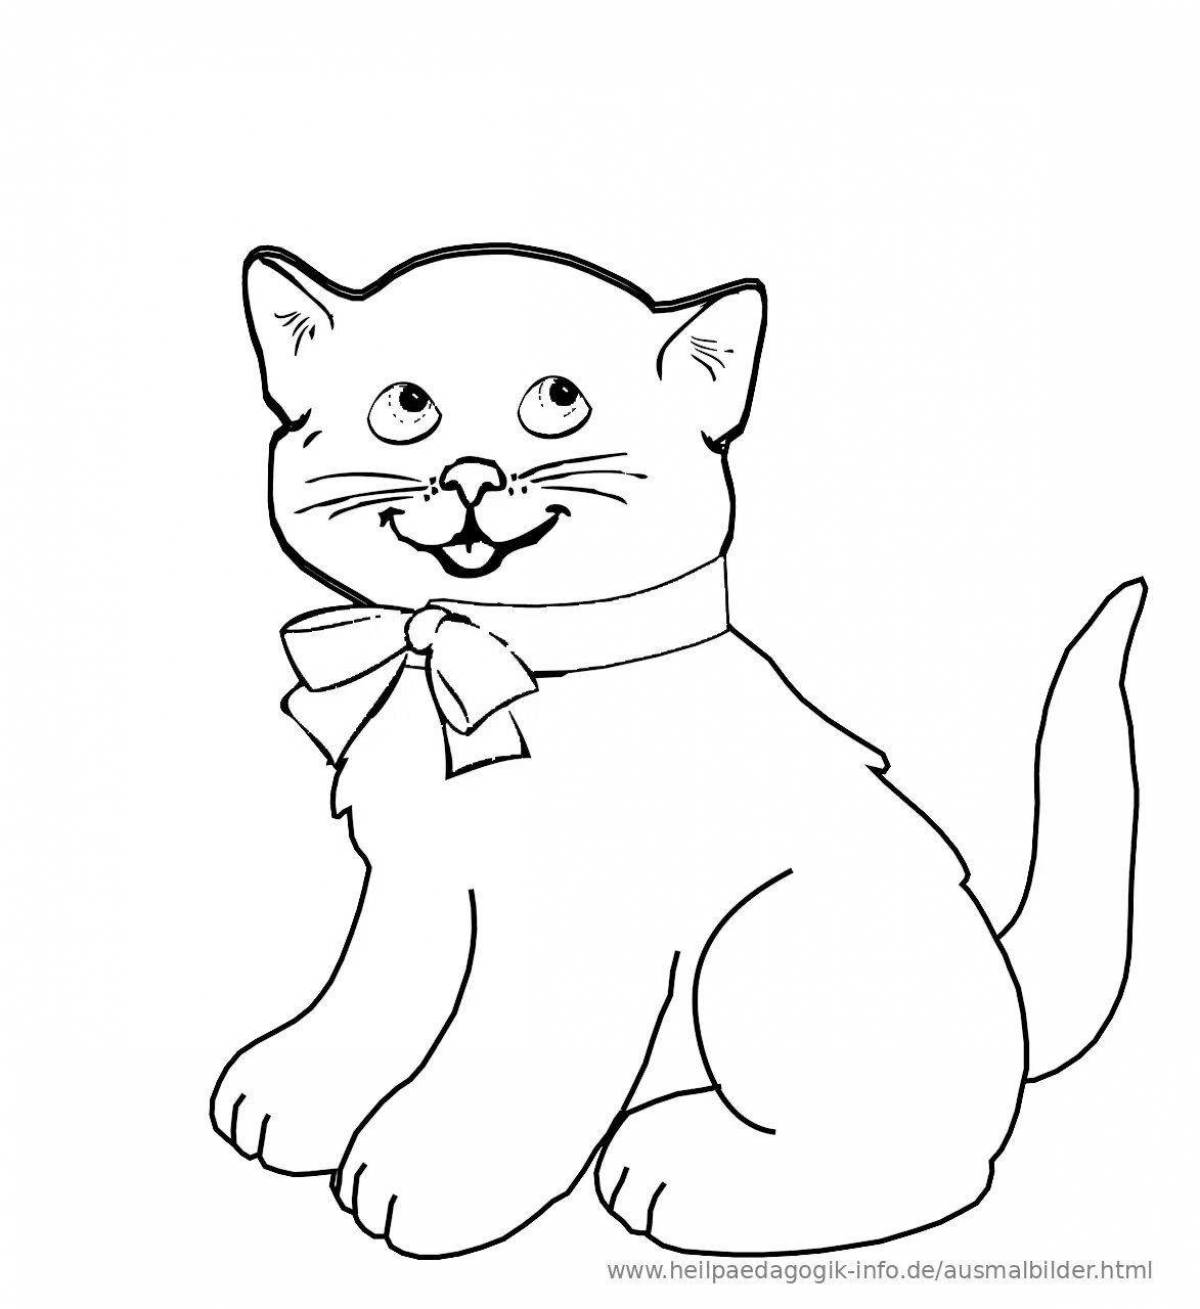 Coloring book sly British cat